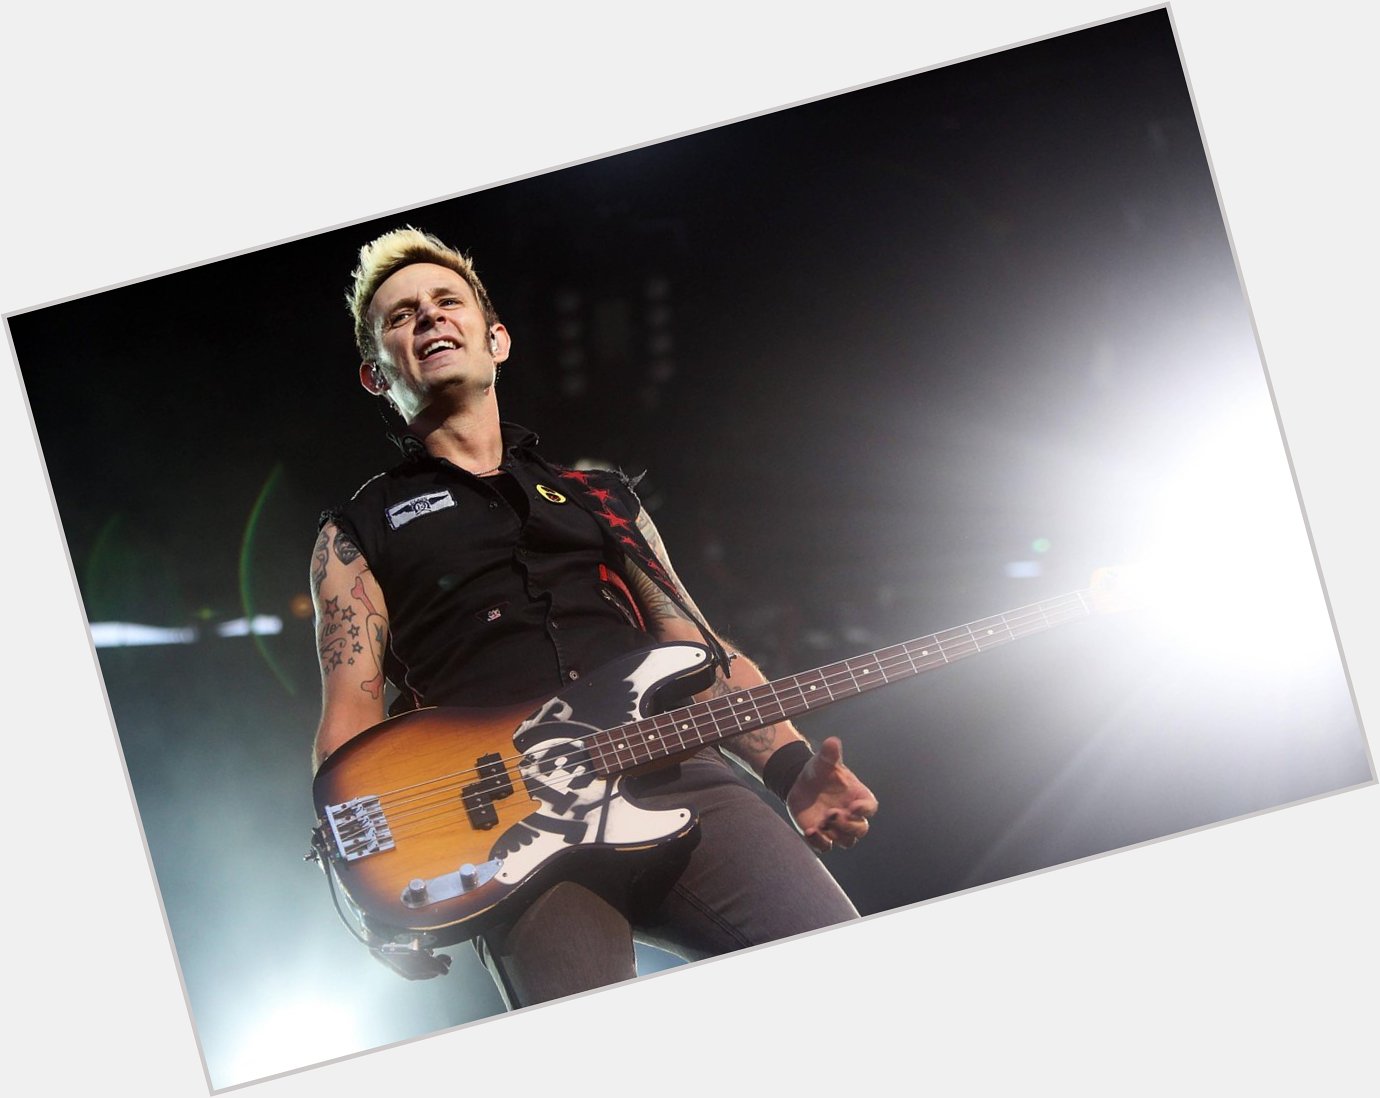 Happy Birthday to Mike Dirnt, who turns 43 today! 